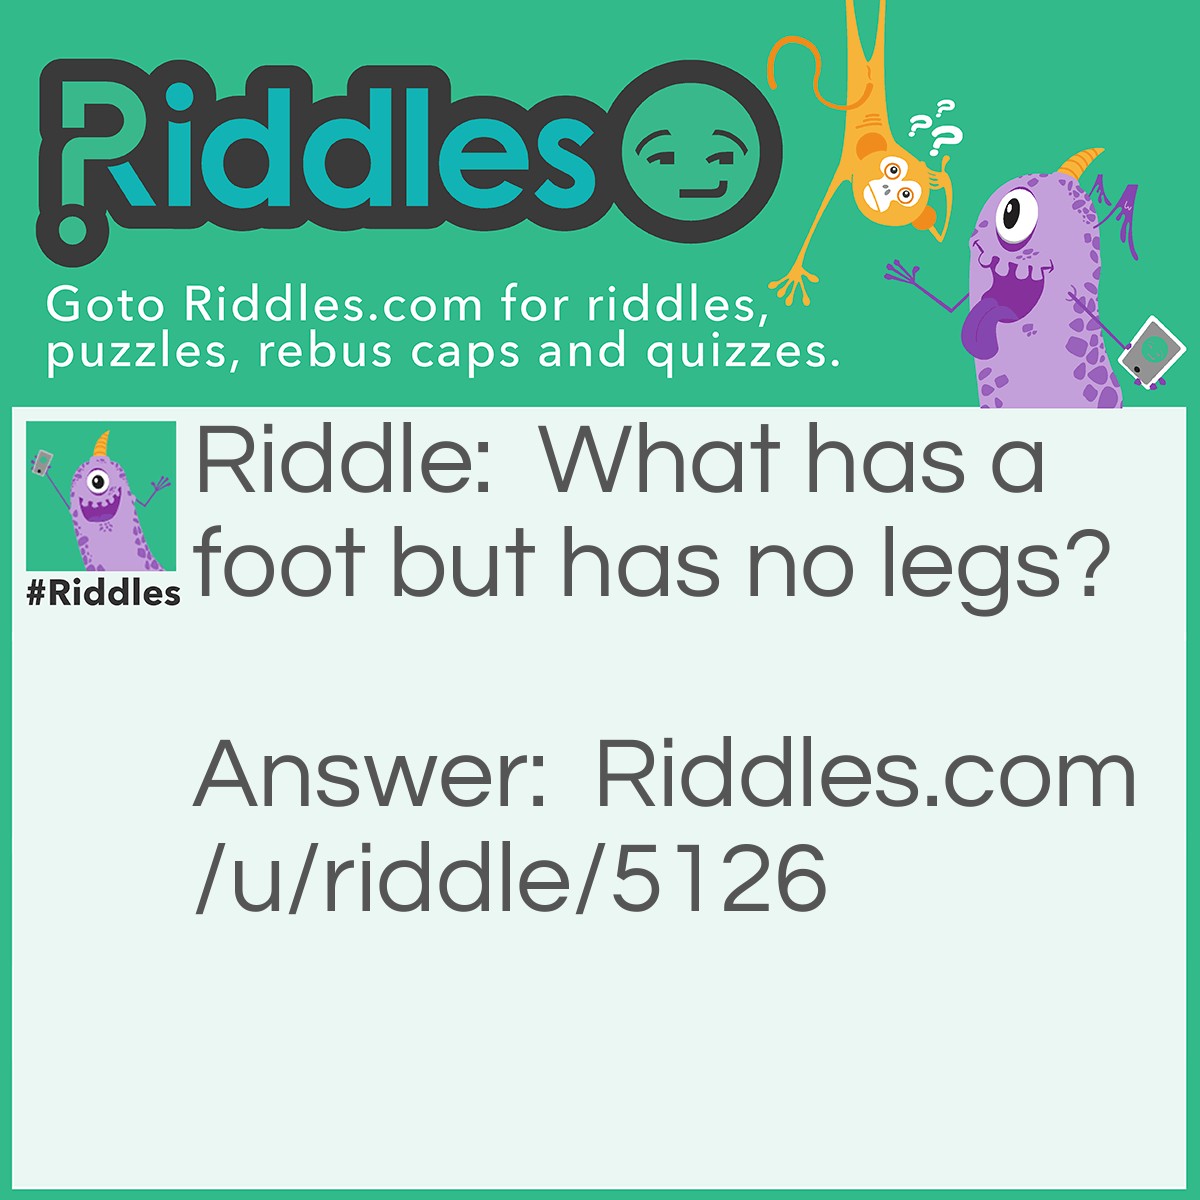 Riddle: What has a foot but has no legs? Answer: A snail.